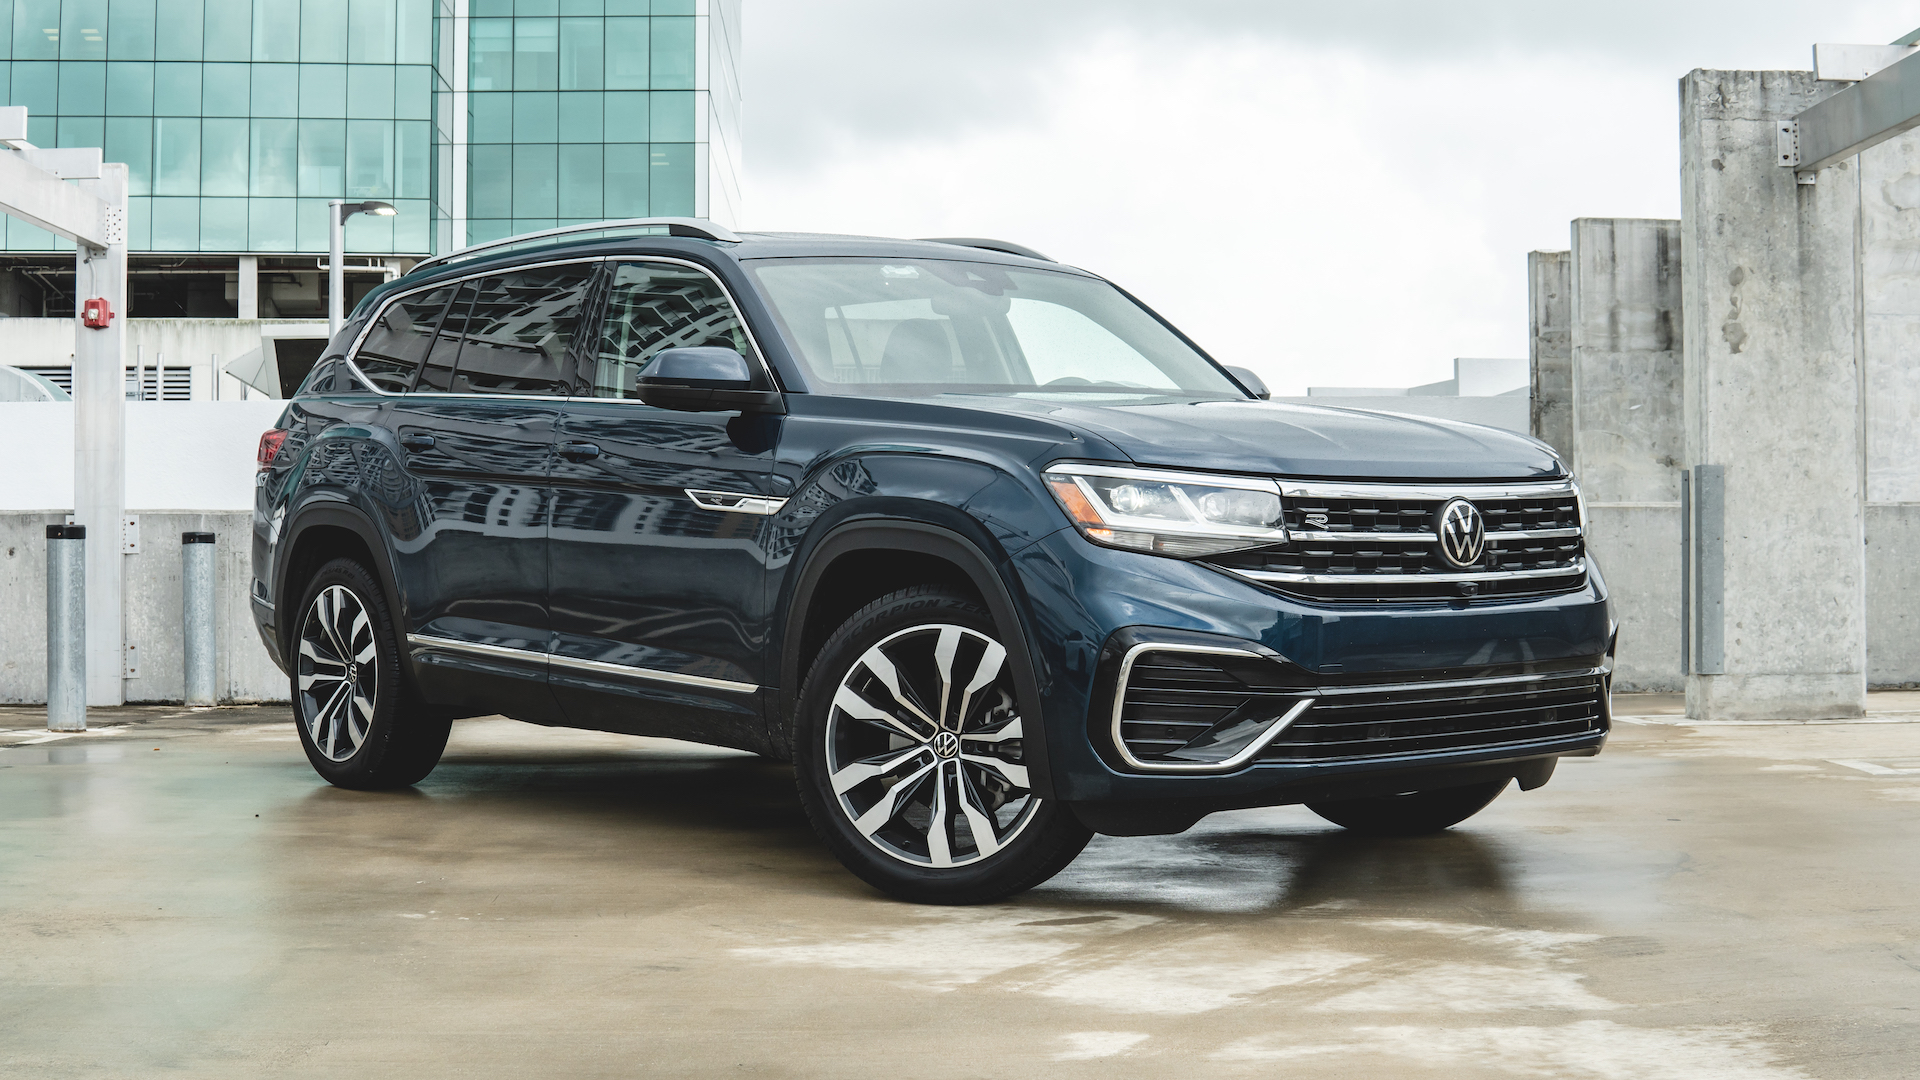 An image of a 2021 Volkswagen Atlas V6 parked outdoors.